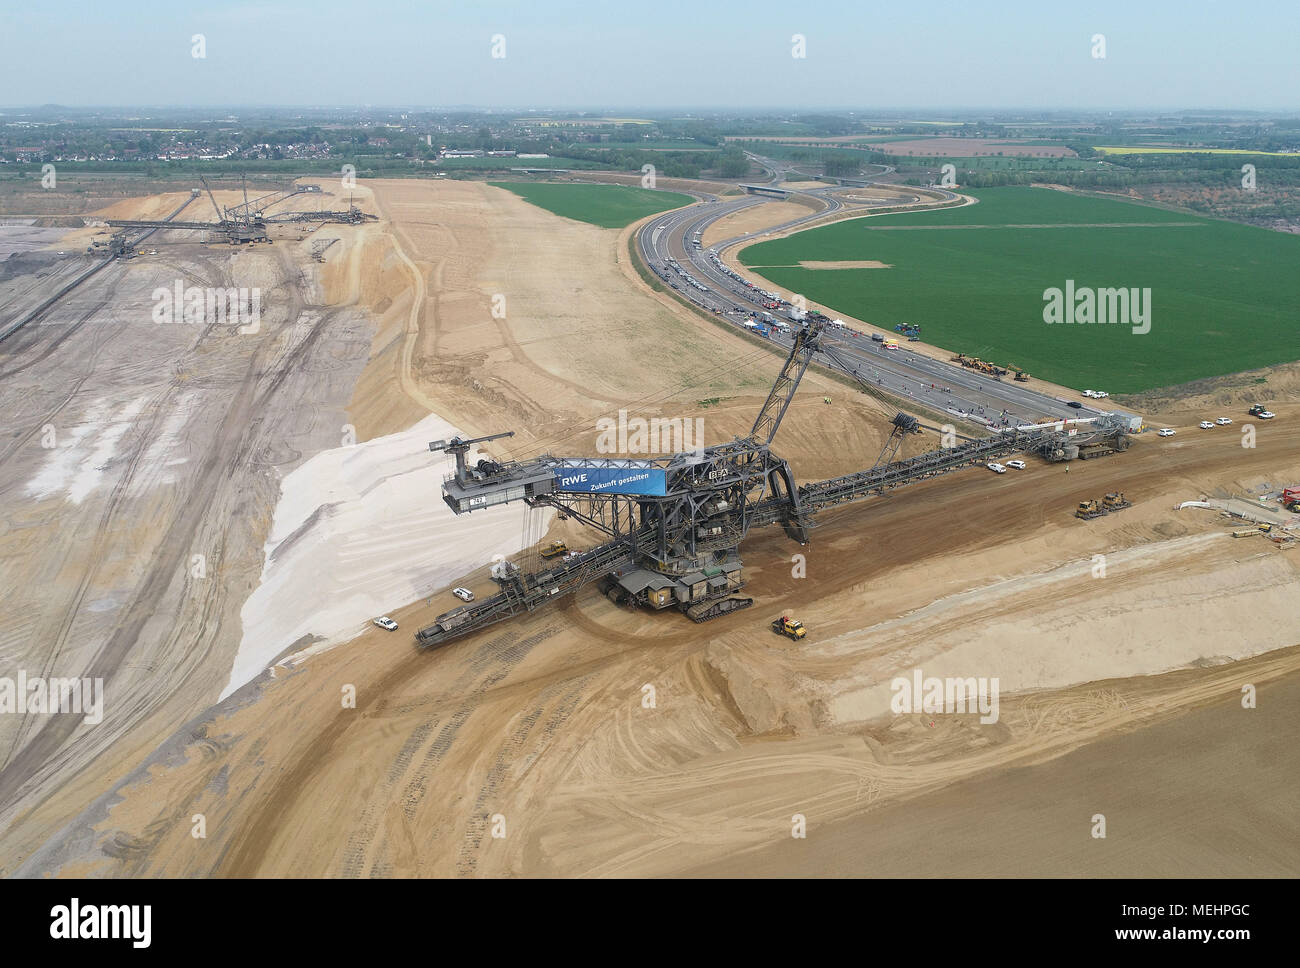 22 April 2018, Germany, Juechen-Hochneukirch: A huge spreader moving from the western section of the Garzweiler surface mine to the eastern Restloch (lit. remaining hole) across the new A44 motorway. The spreader is 48 metres high, 141 metres long and weighs 2,500 tonnes and can manage four to eight metres per minute. (Aerial photograph taken using a drone) Photo: Henning Kaiser/dpa Stock Photo